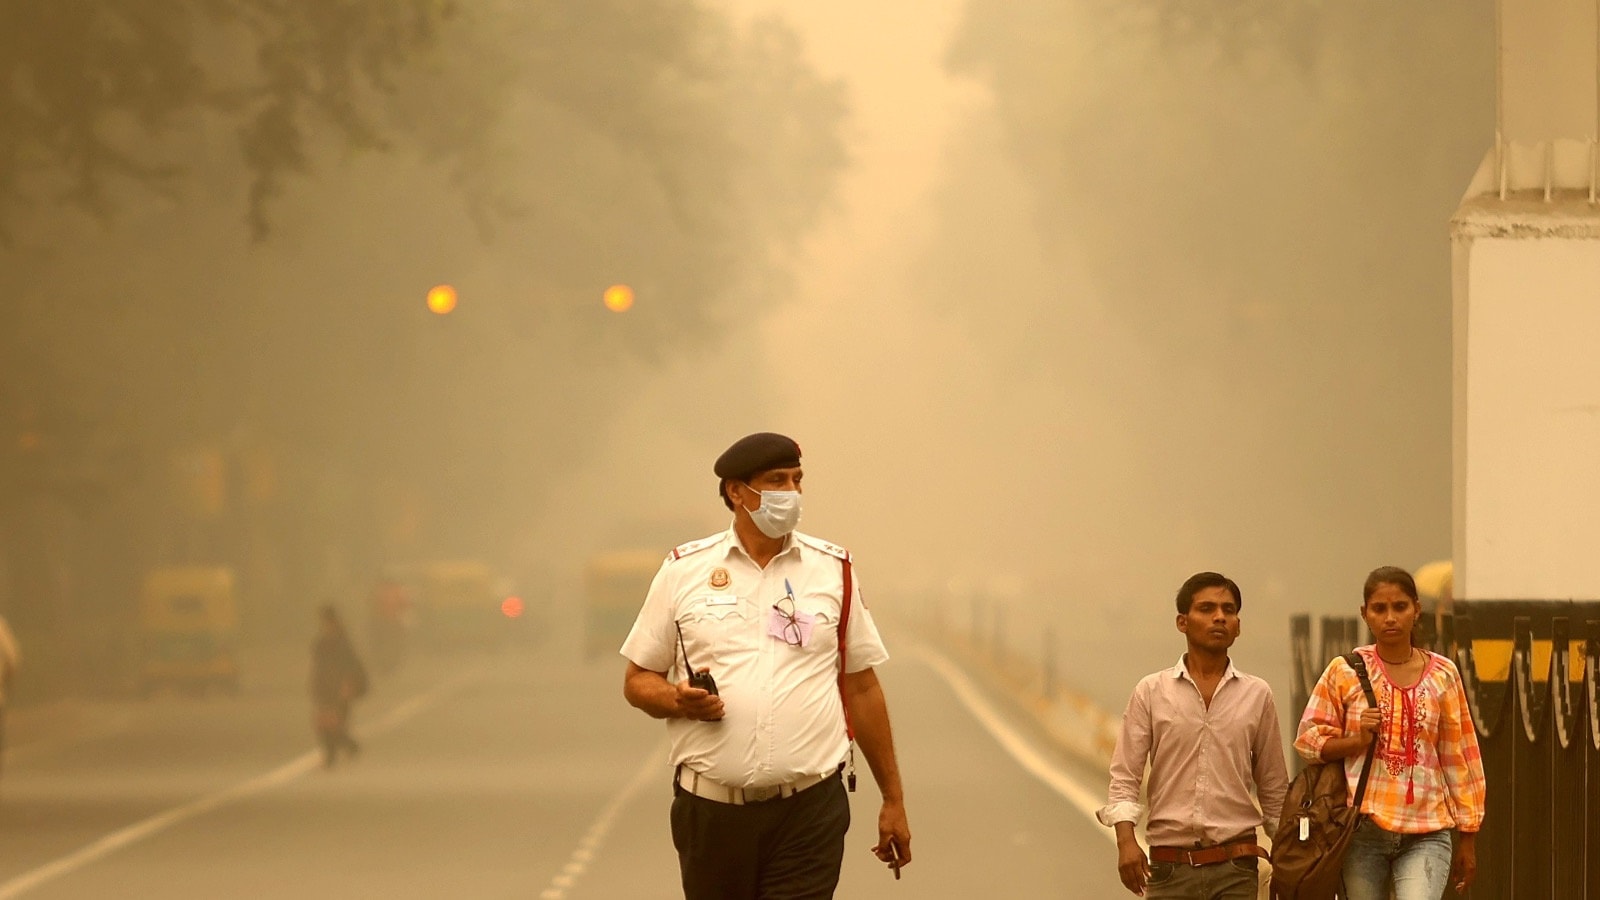 What level of air pollution makes it unsafe to exercise outdoors?